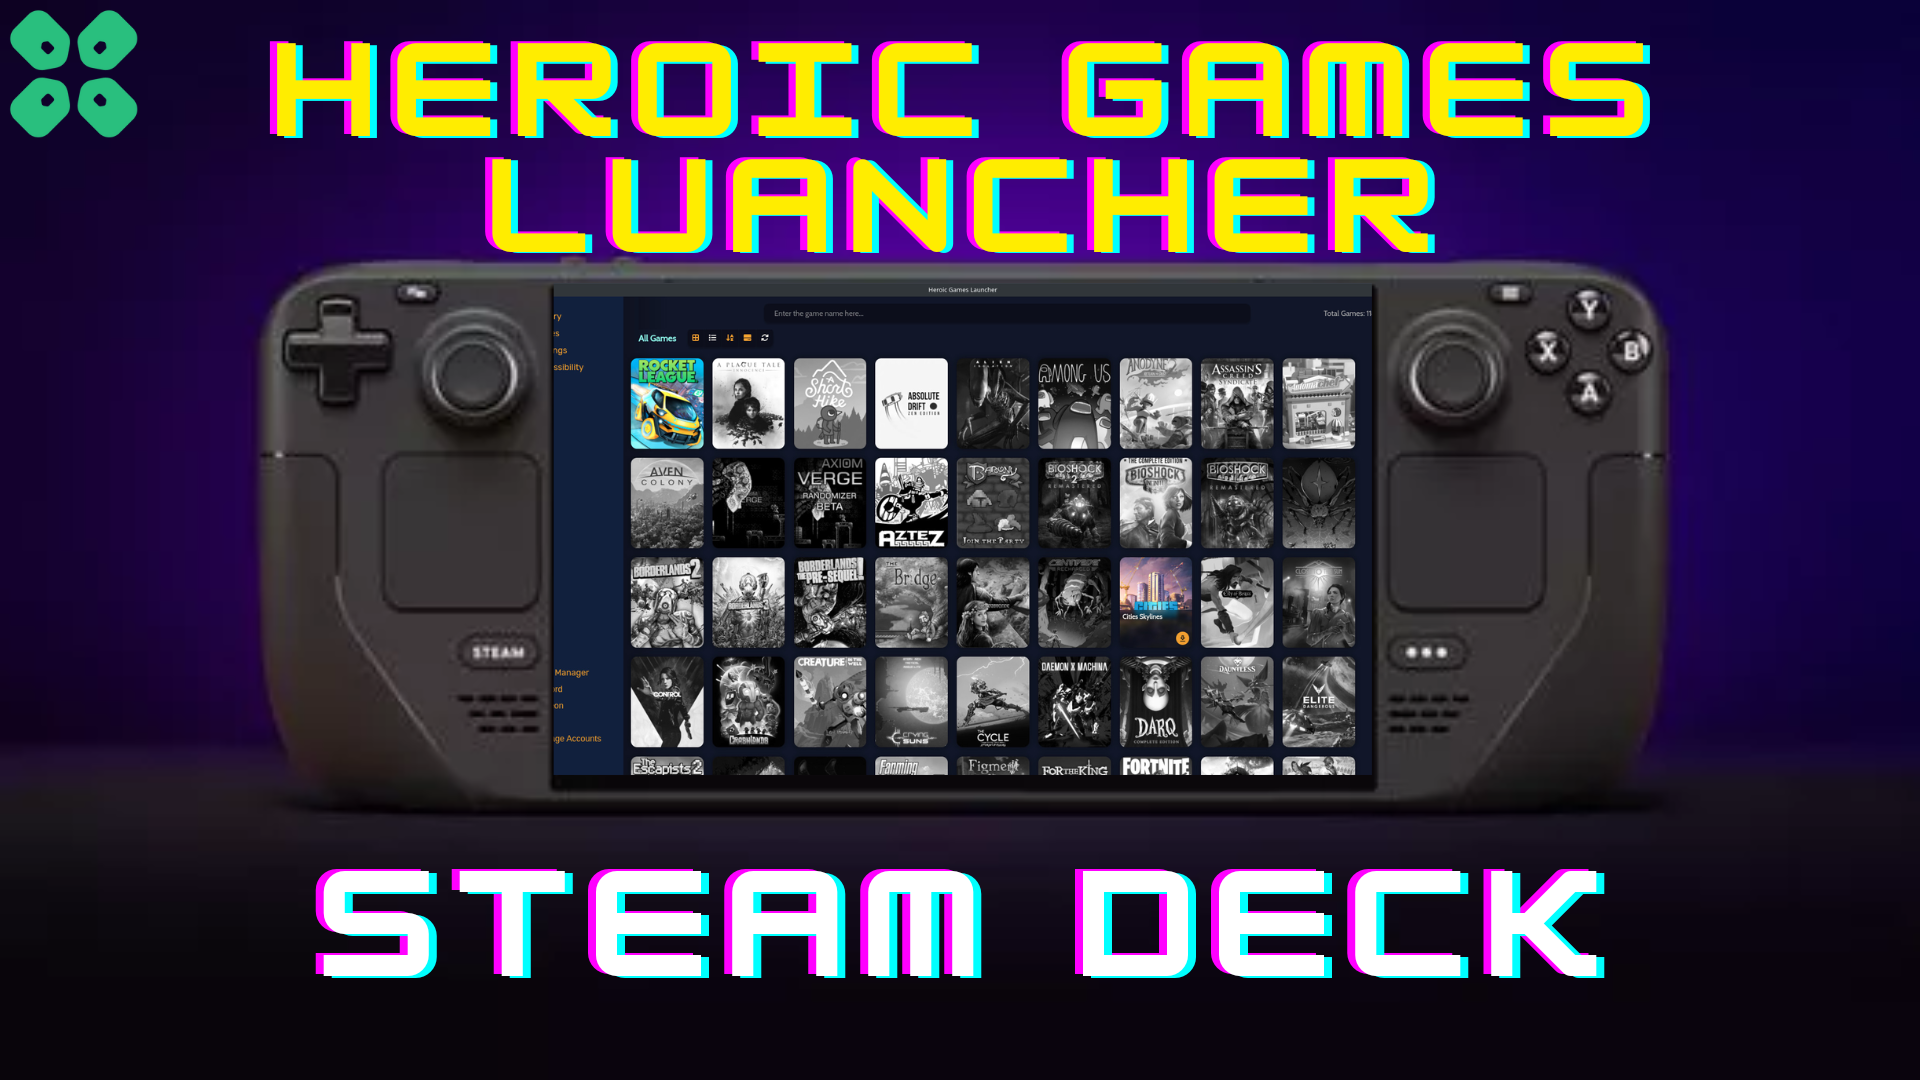 Heroic Games Launcher on Steam Deck